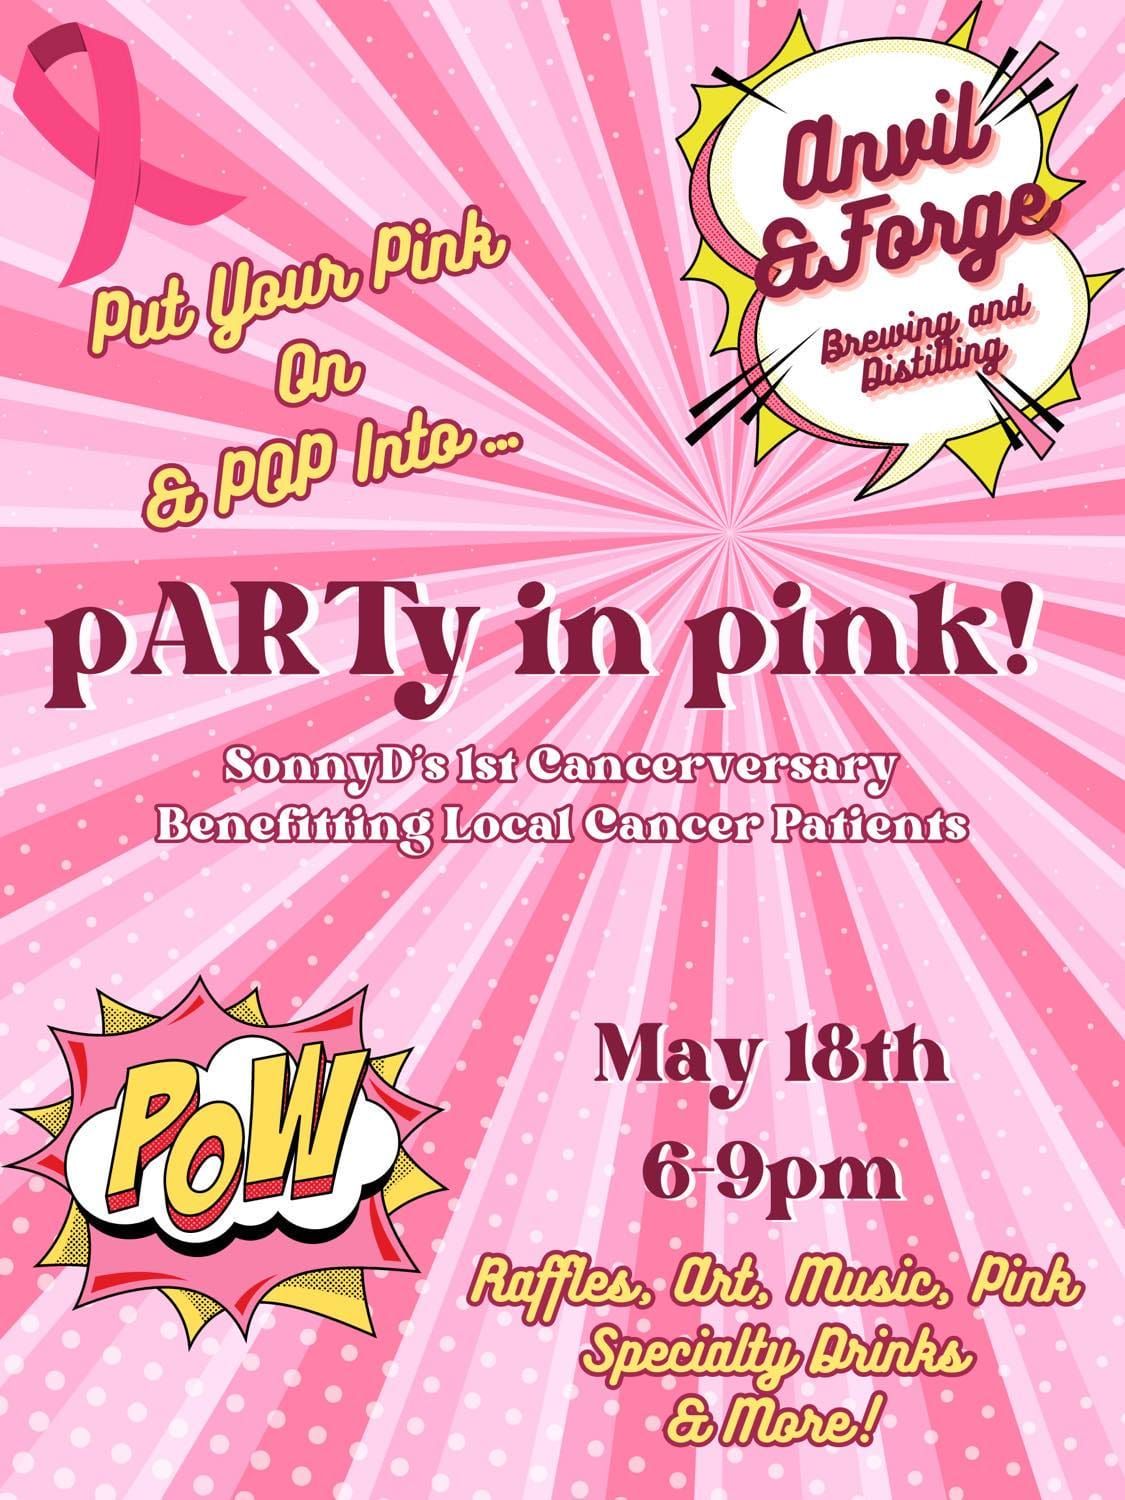 pARTy in pink! SonnyD's 1st Cancerversary Benefit Show